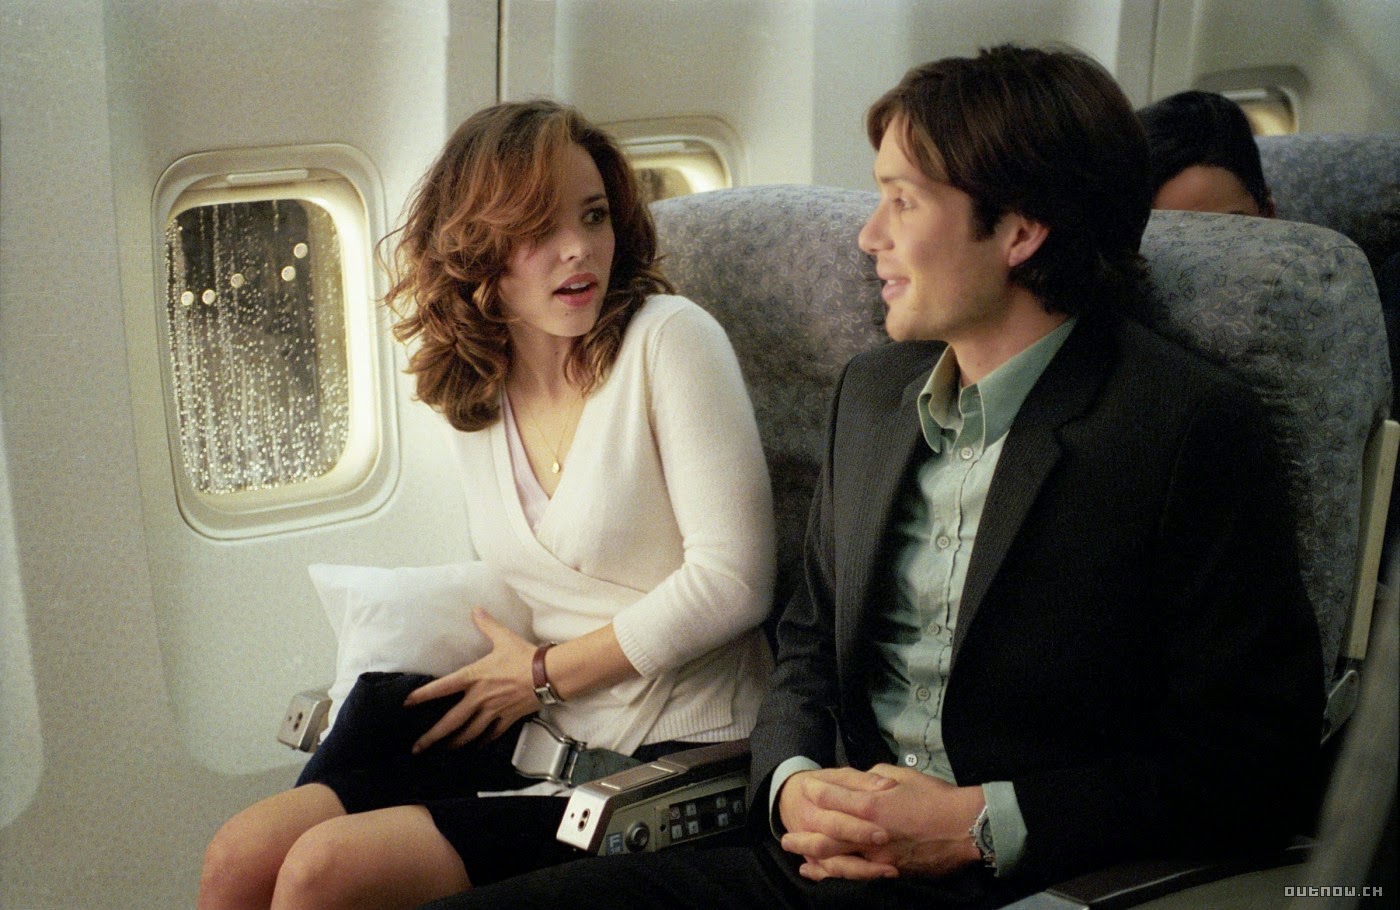 Worst movies anyone should avoid watching on an airplane